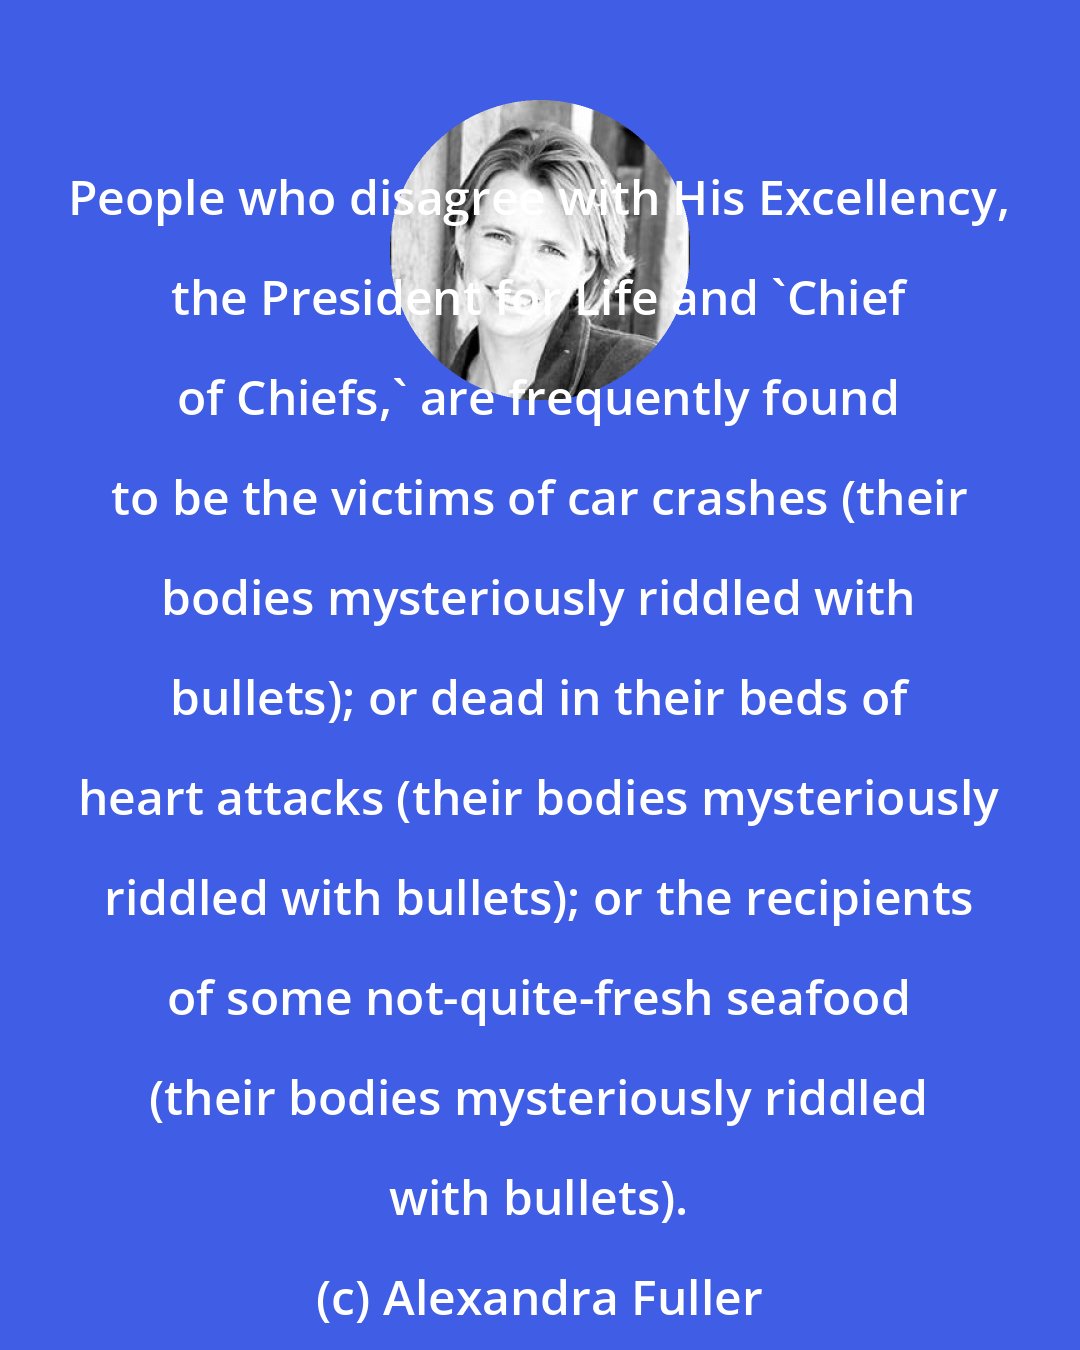 Alexandra Fuller: People who disagree with His Excellency, the President for Life and 'Chief of Chiefs,' are frequently found to be the victims of car crashes (their bodies mysteriously riddled with bullets); or dead in their beds of heart attacks (their bodies mysteriously riddled with bullets); or the recipients of some not-quite-fresh seafood (their bodies mysteriously riddled with bullets).